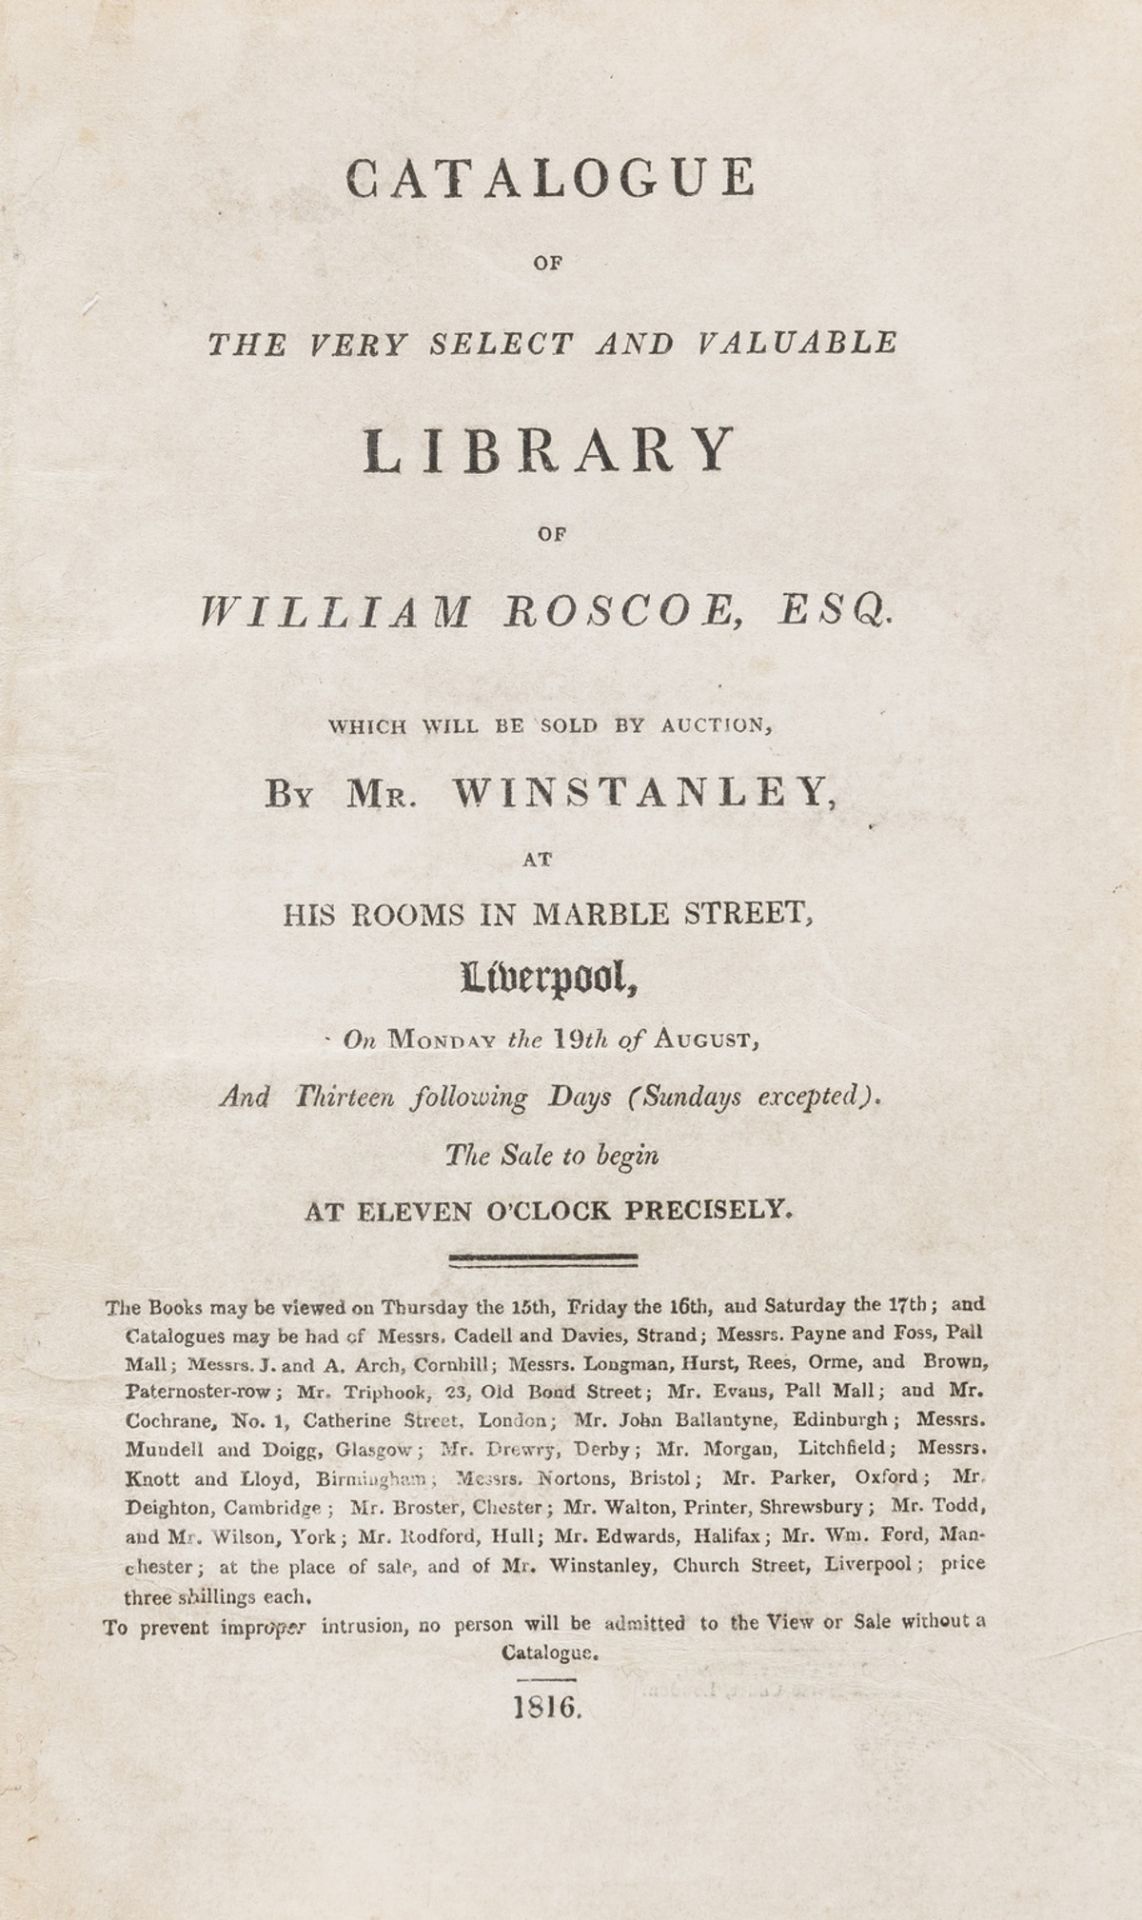 Book auction catalogue.- Catalogue of the very select and valuable library of William Roscoe, Esq. …